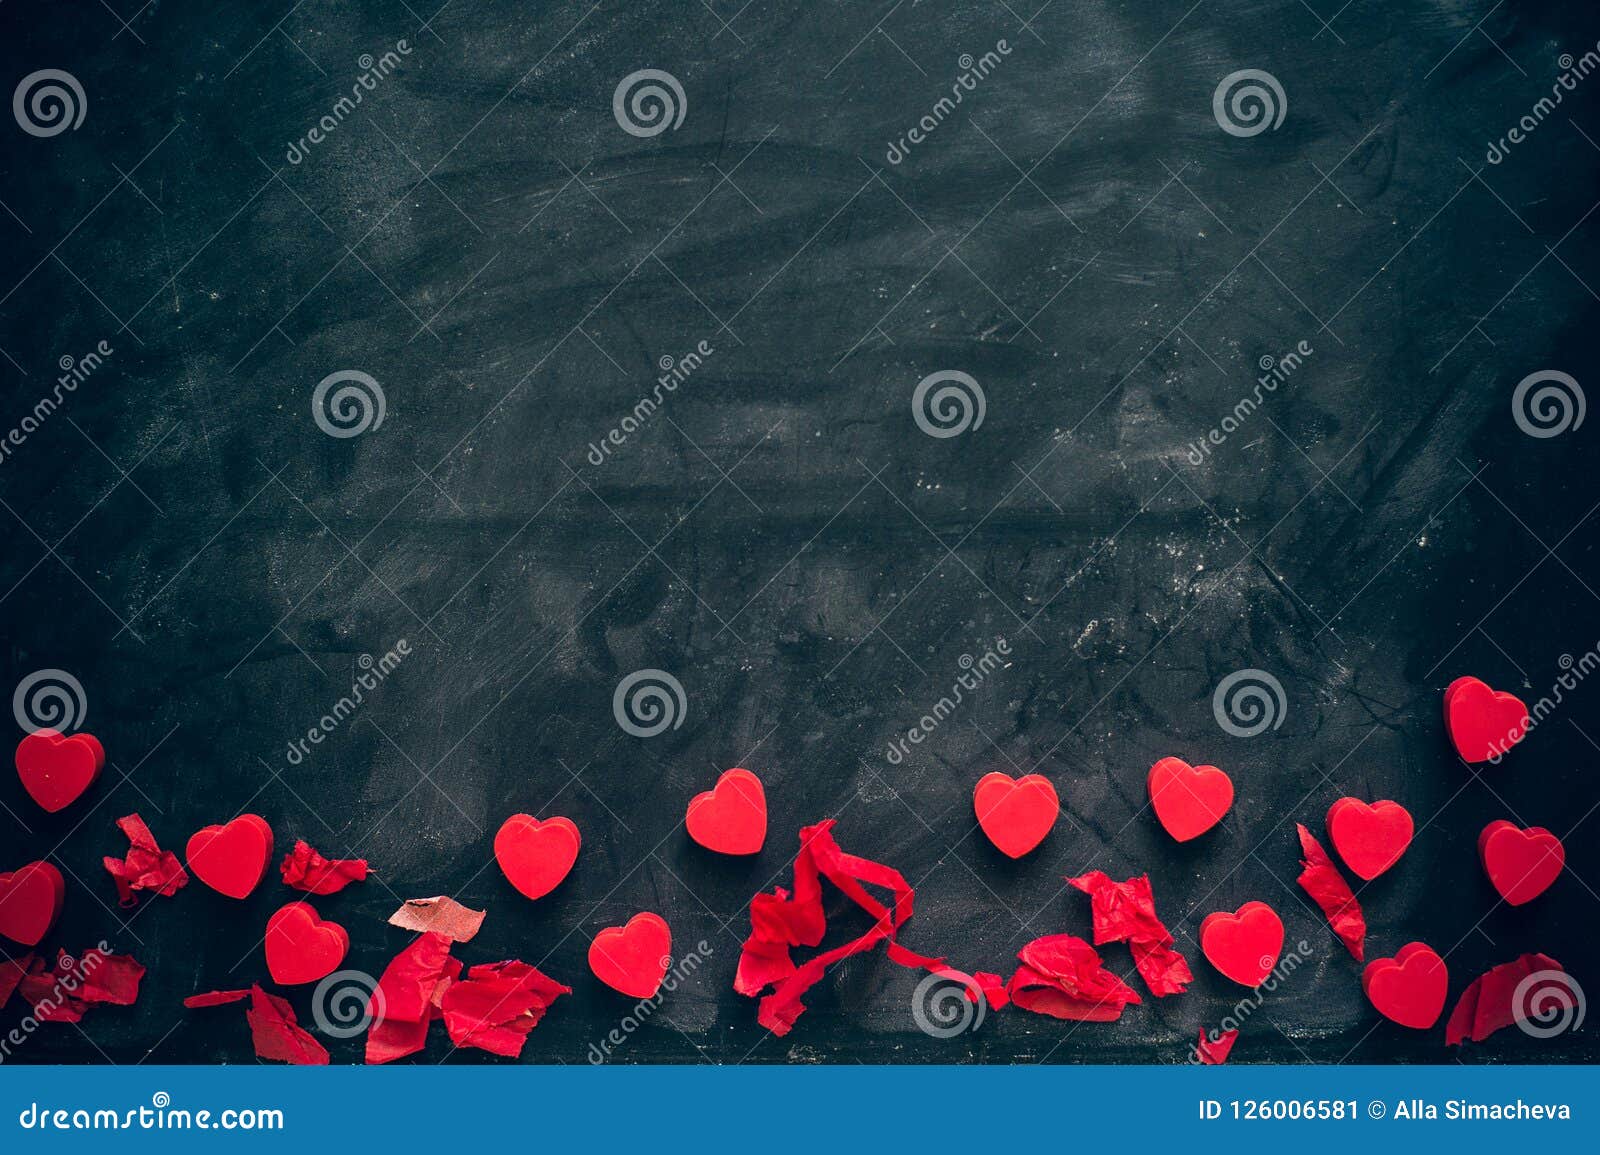 Lots of Little Red Hearts on Black Background. Romantic Love Background for  Valentine`s Day, Birthday, Party, Wedding. Stock Image - Image of idea,  black: 126006581